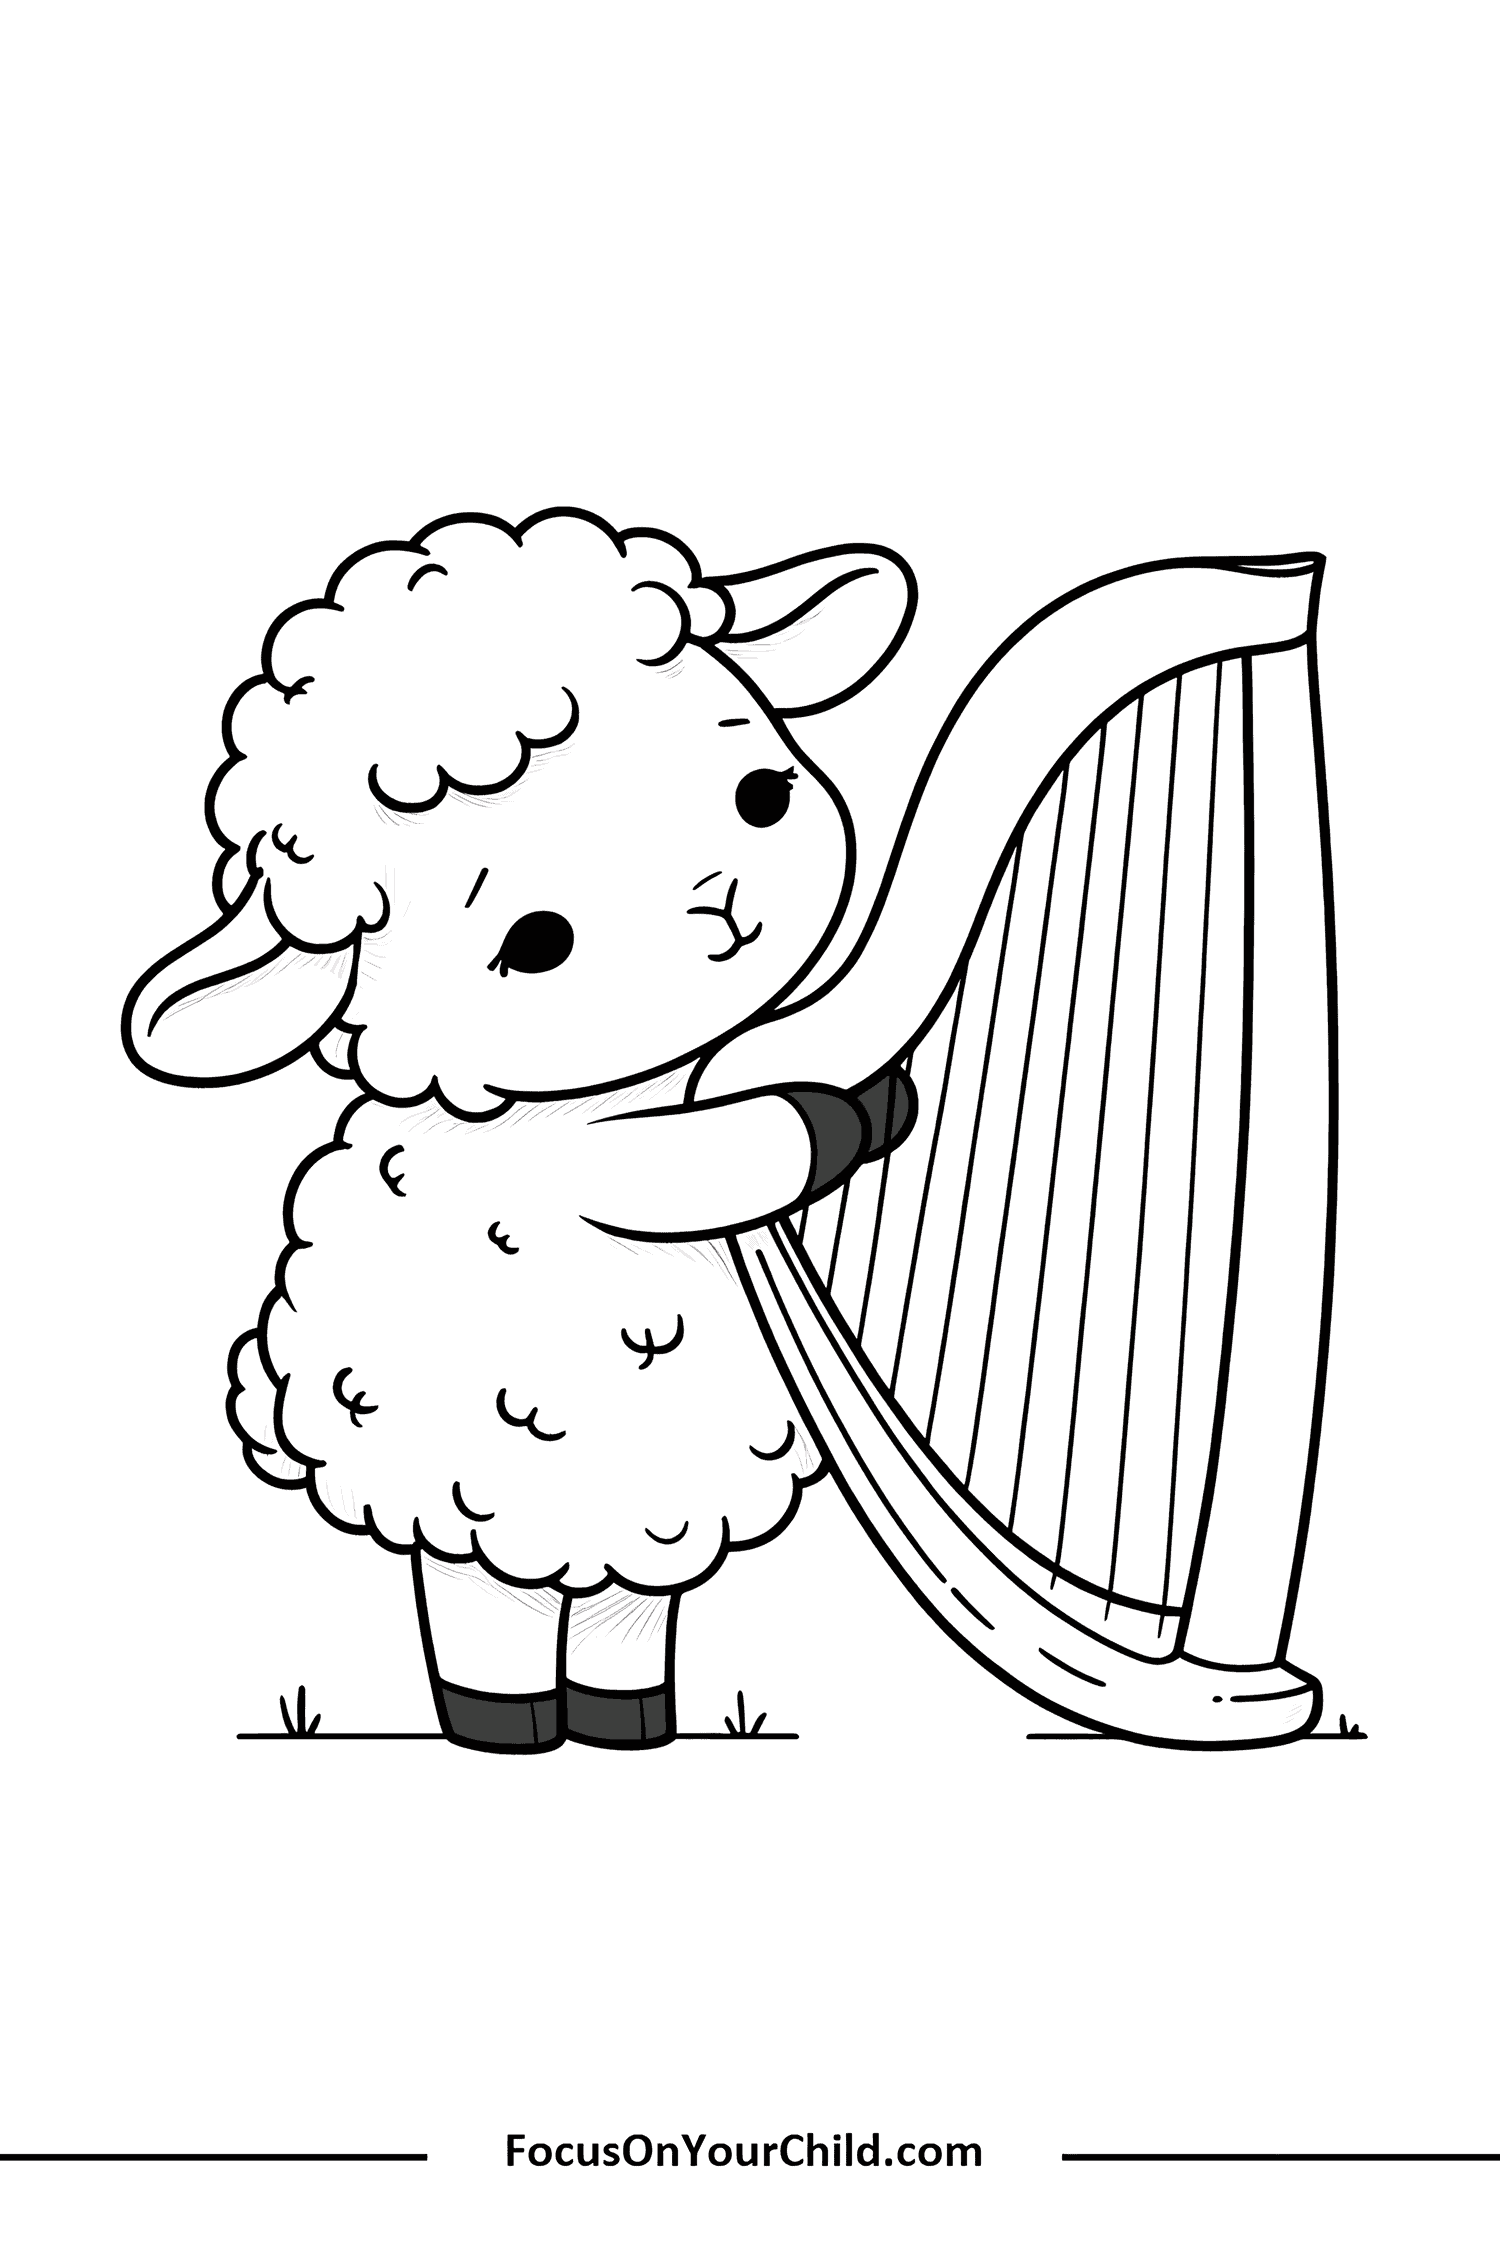 Cute lamb playing harp on grassy field for childrens content.